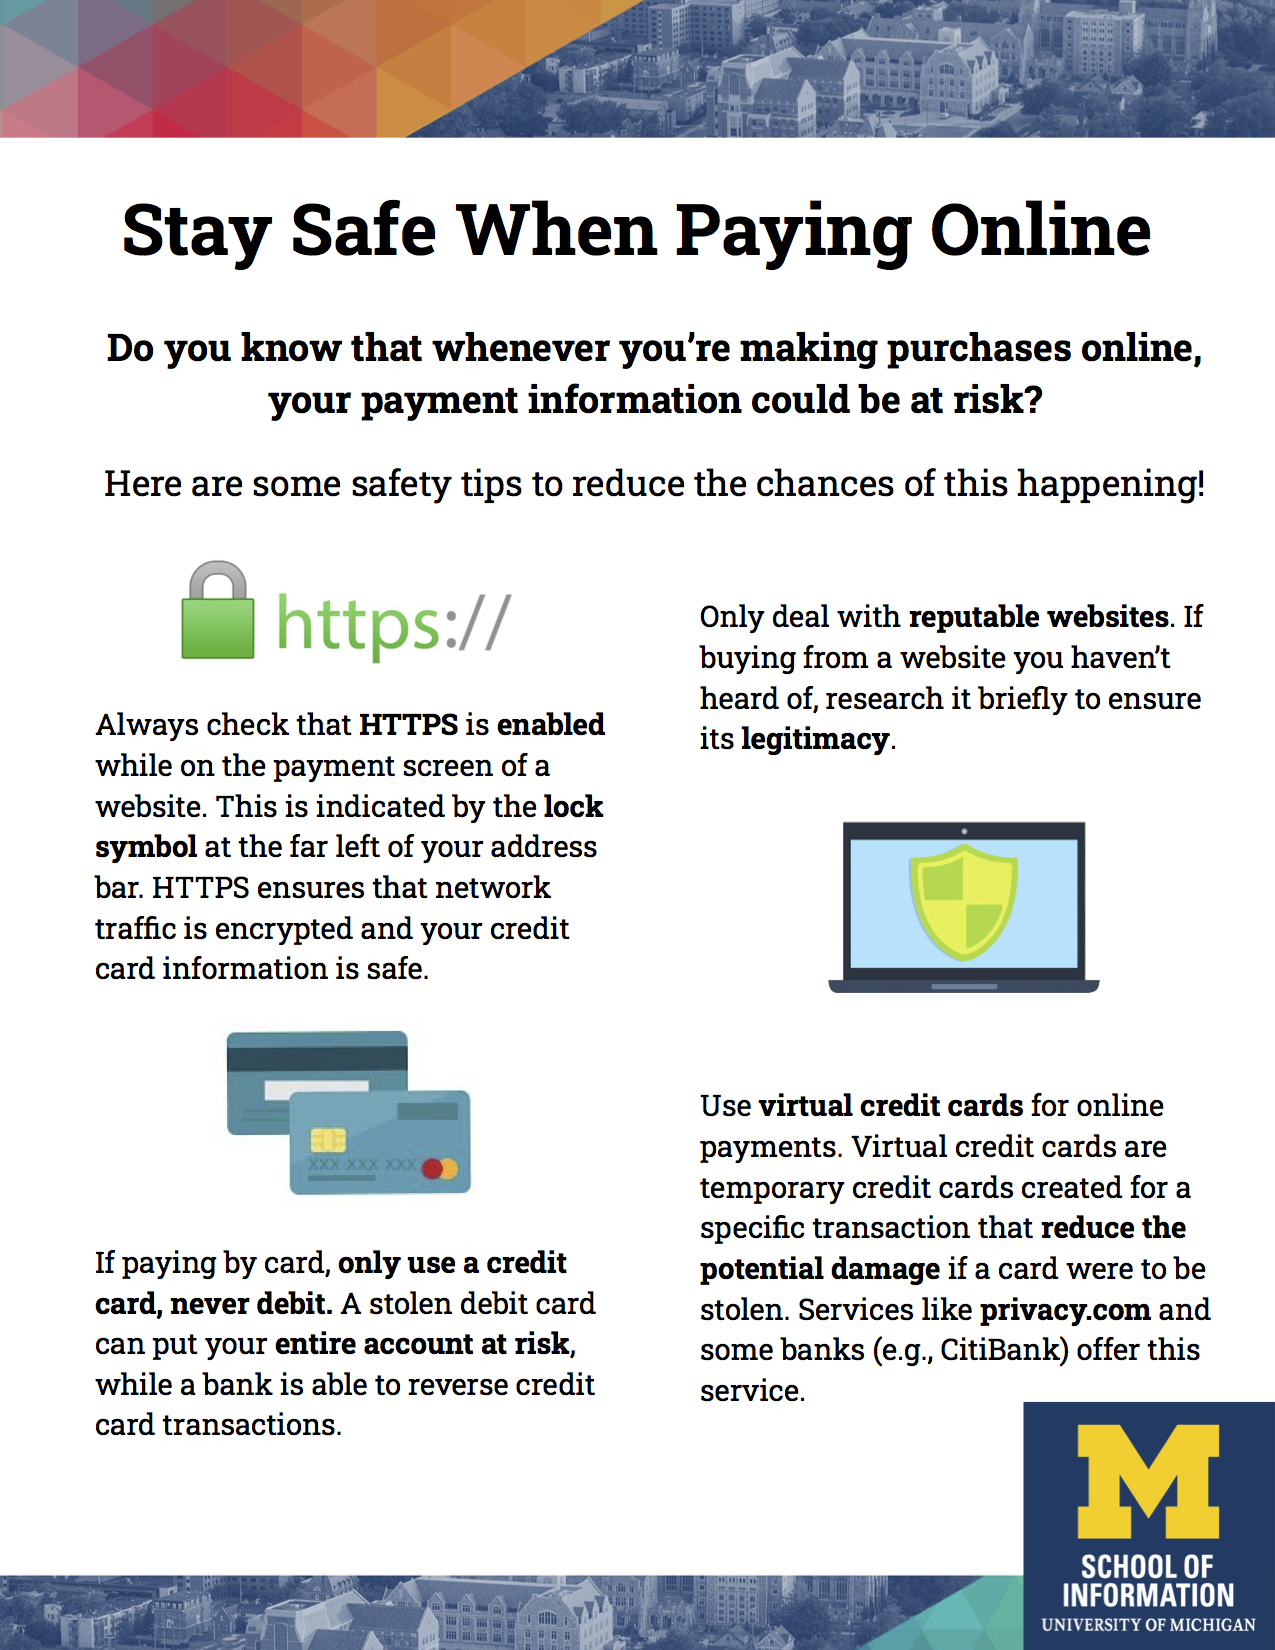 Preview of the Online Payments poster.